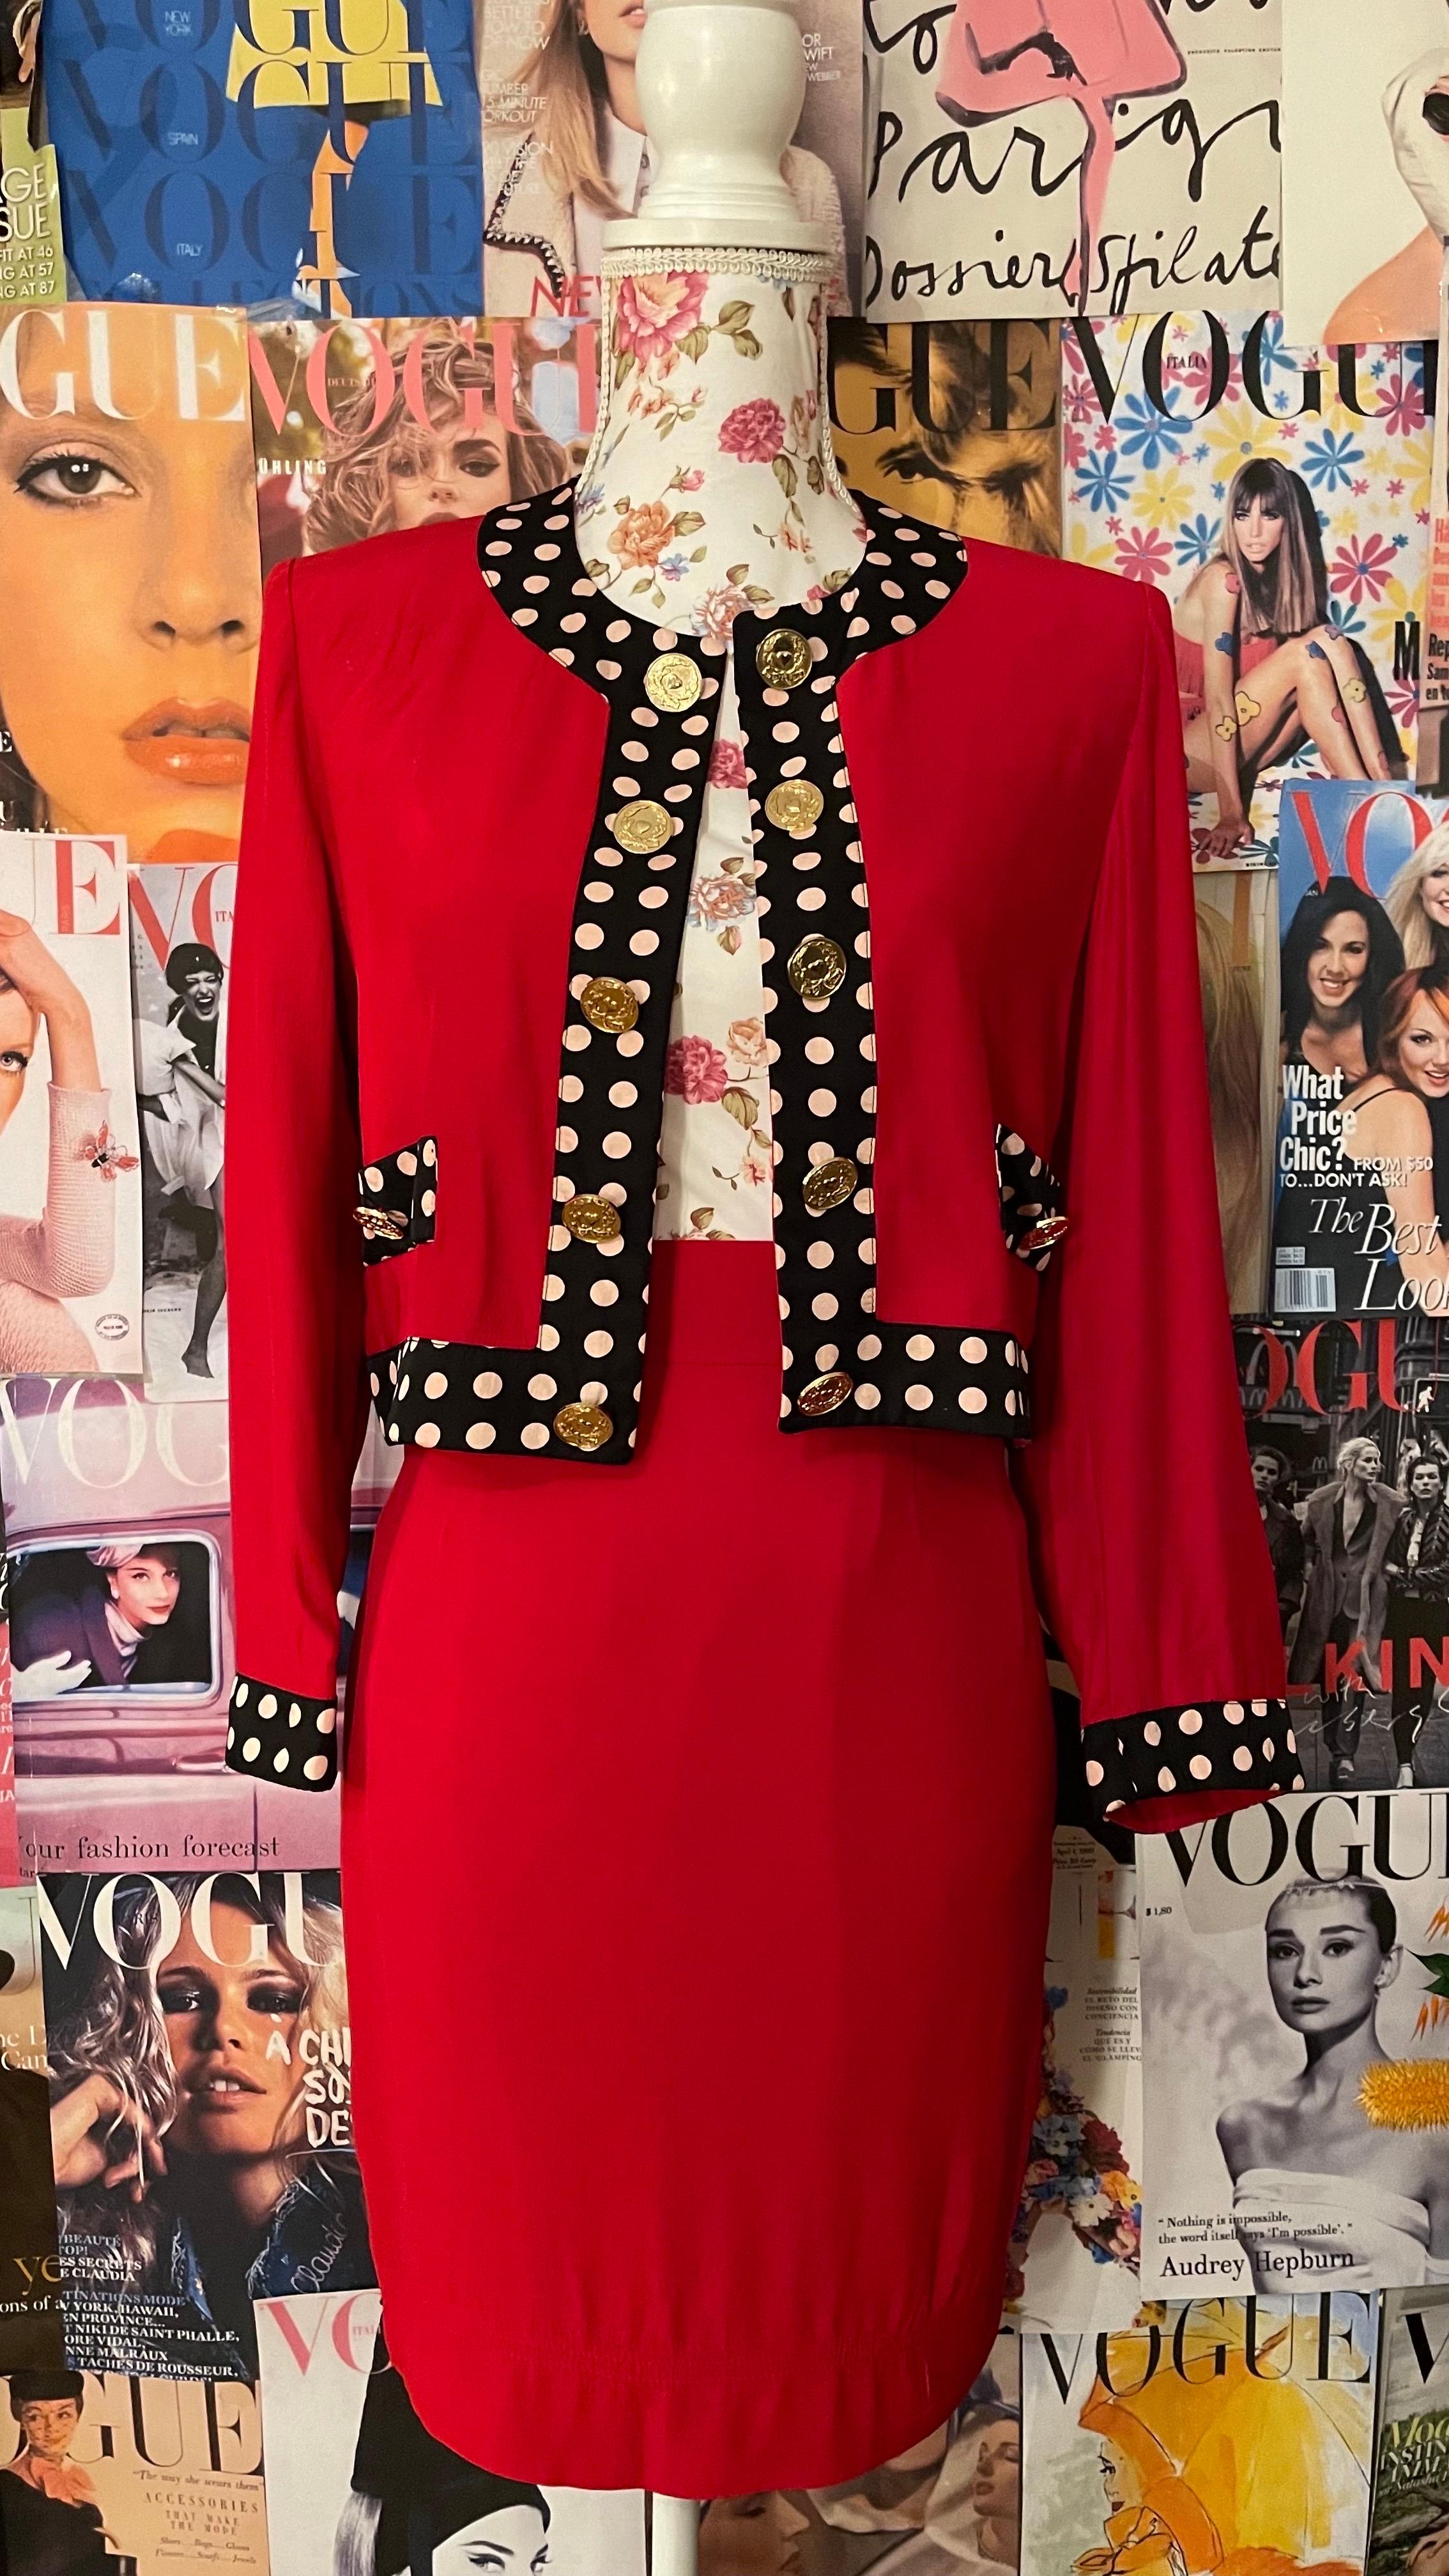 1990's Vintage red and polka dot print skirt suit by MOSCHINO Cheap & Chic , jacket and skirt are in perfect condition.  45% rayon 55% Acetate. 


Sizes
 I 40 
Fr 36 
US 6 
UK 10 

Measurements : 

JACKET :

Shoulders : 37 cm 
Waist : 42cm
Bust : 42